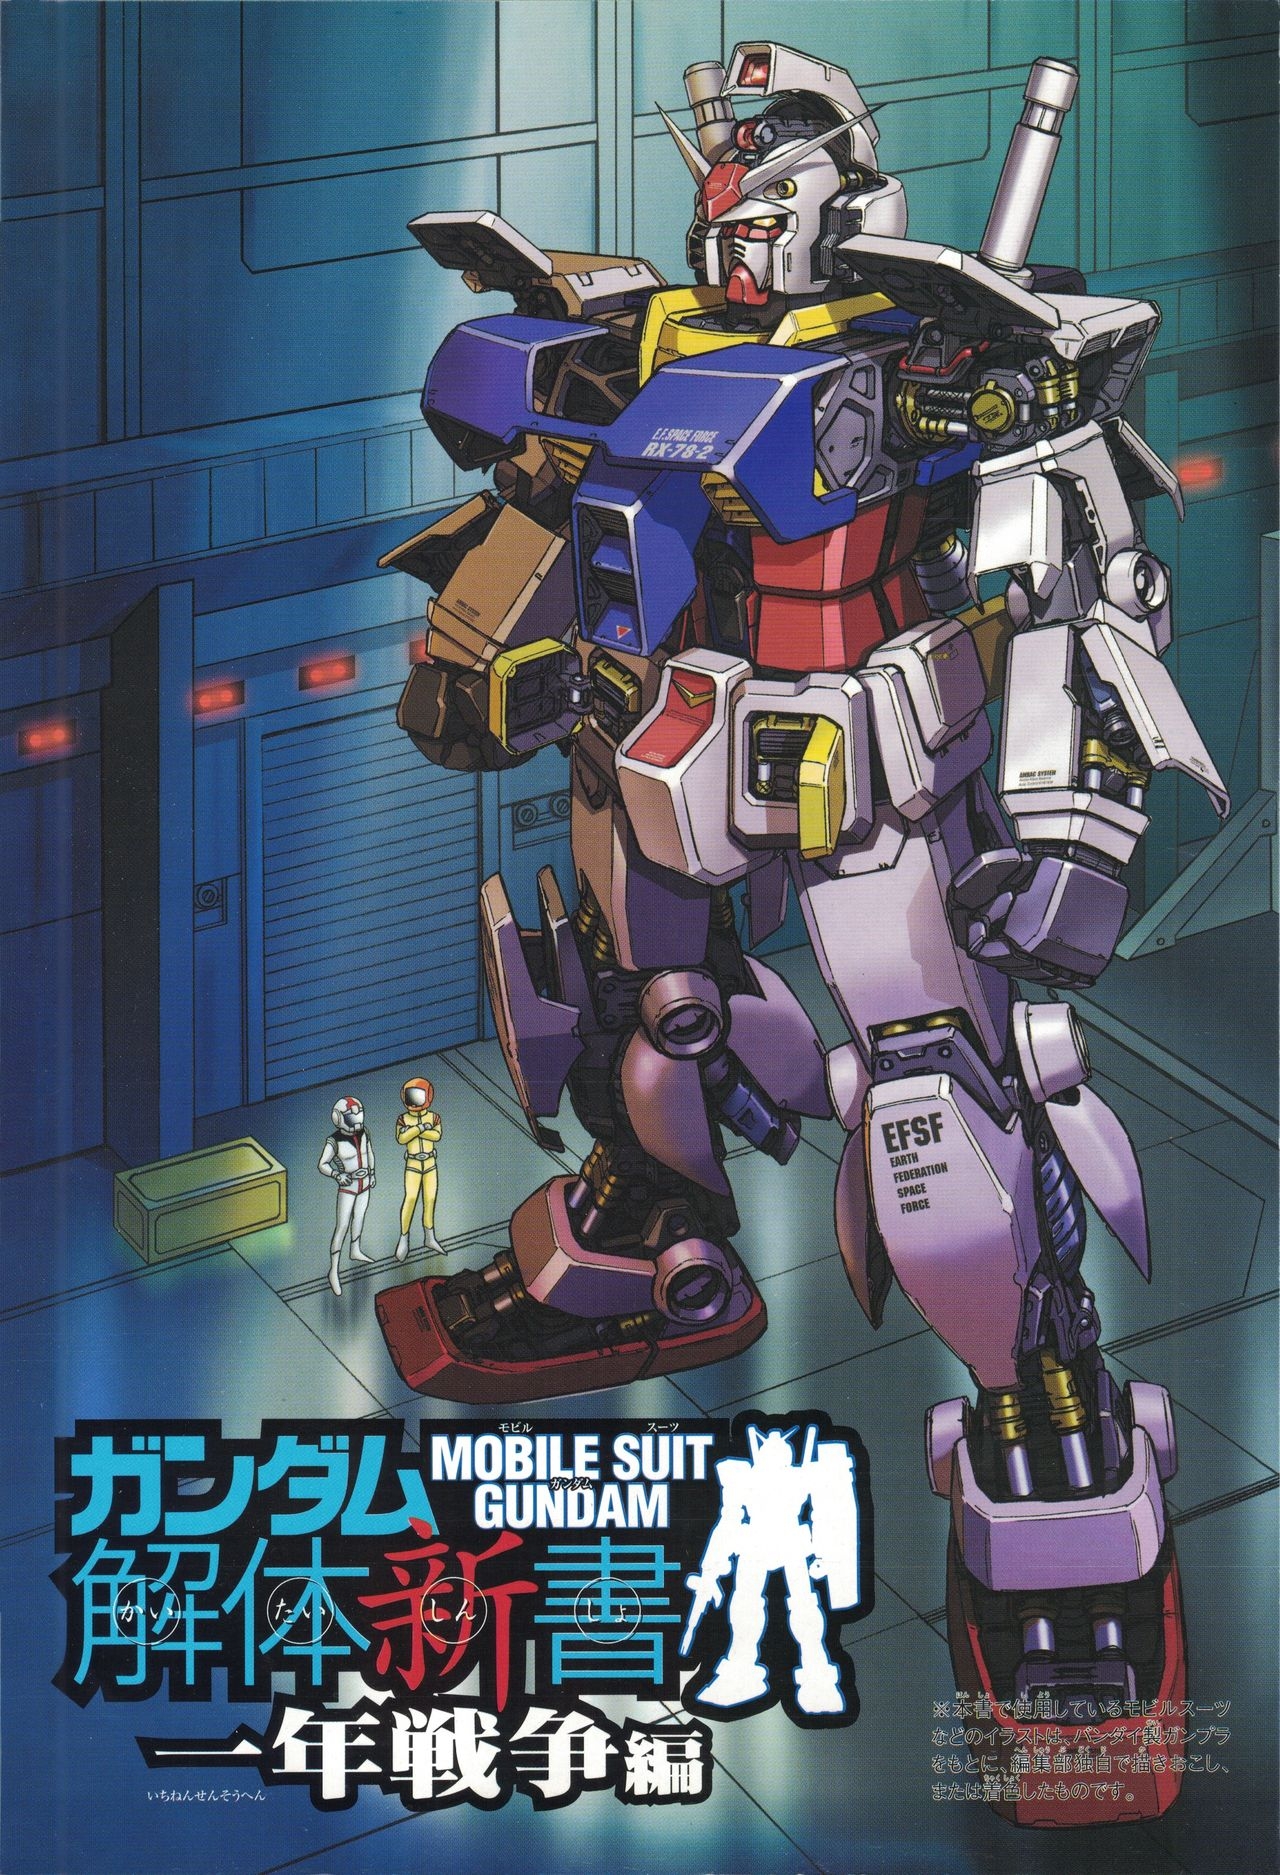 Mobile Suit Gundam - New Cross-Section Book - One Year War Edition 4